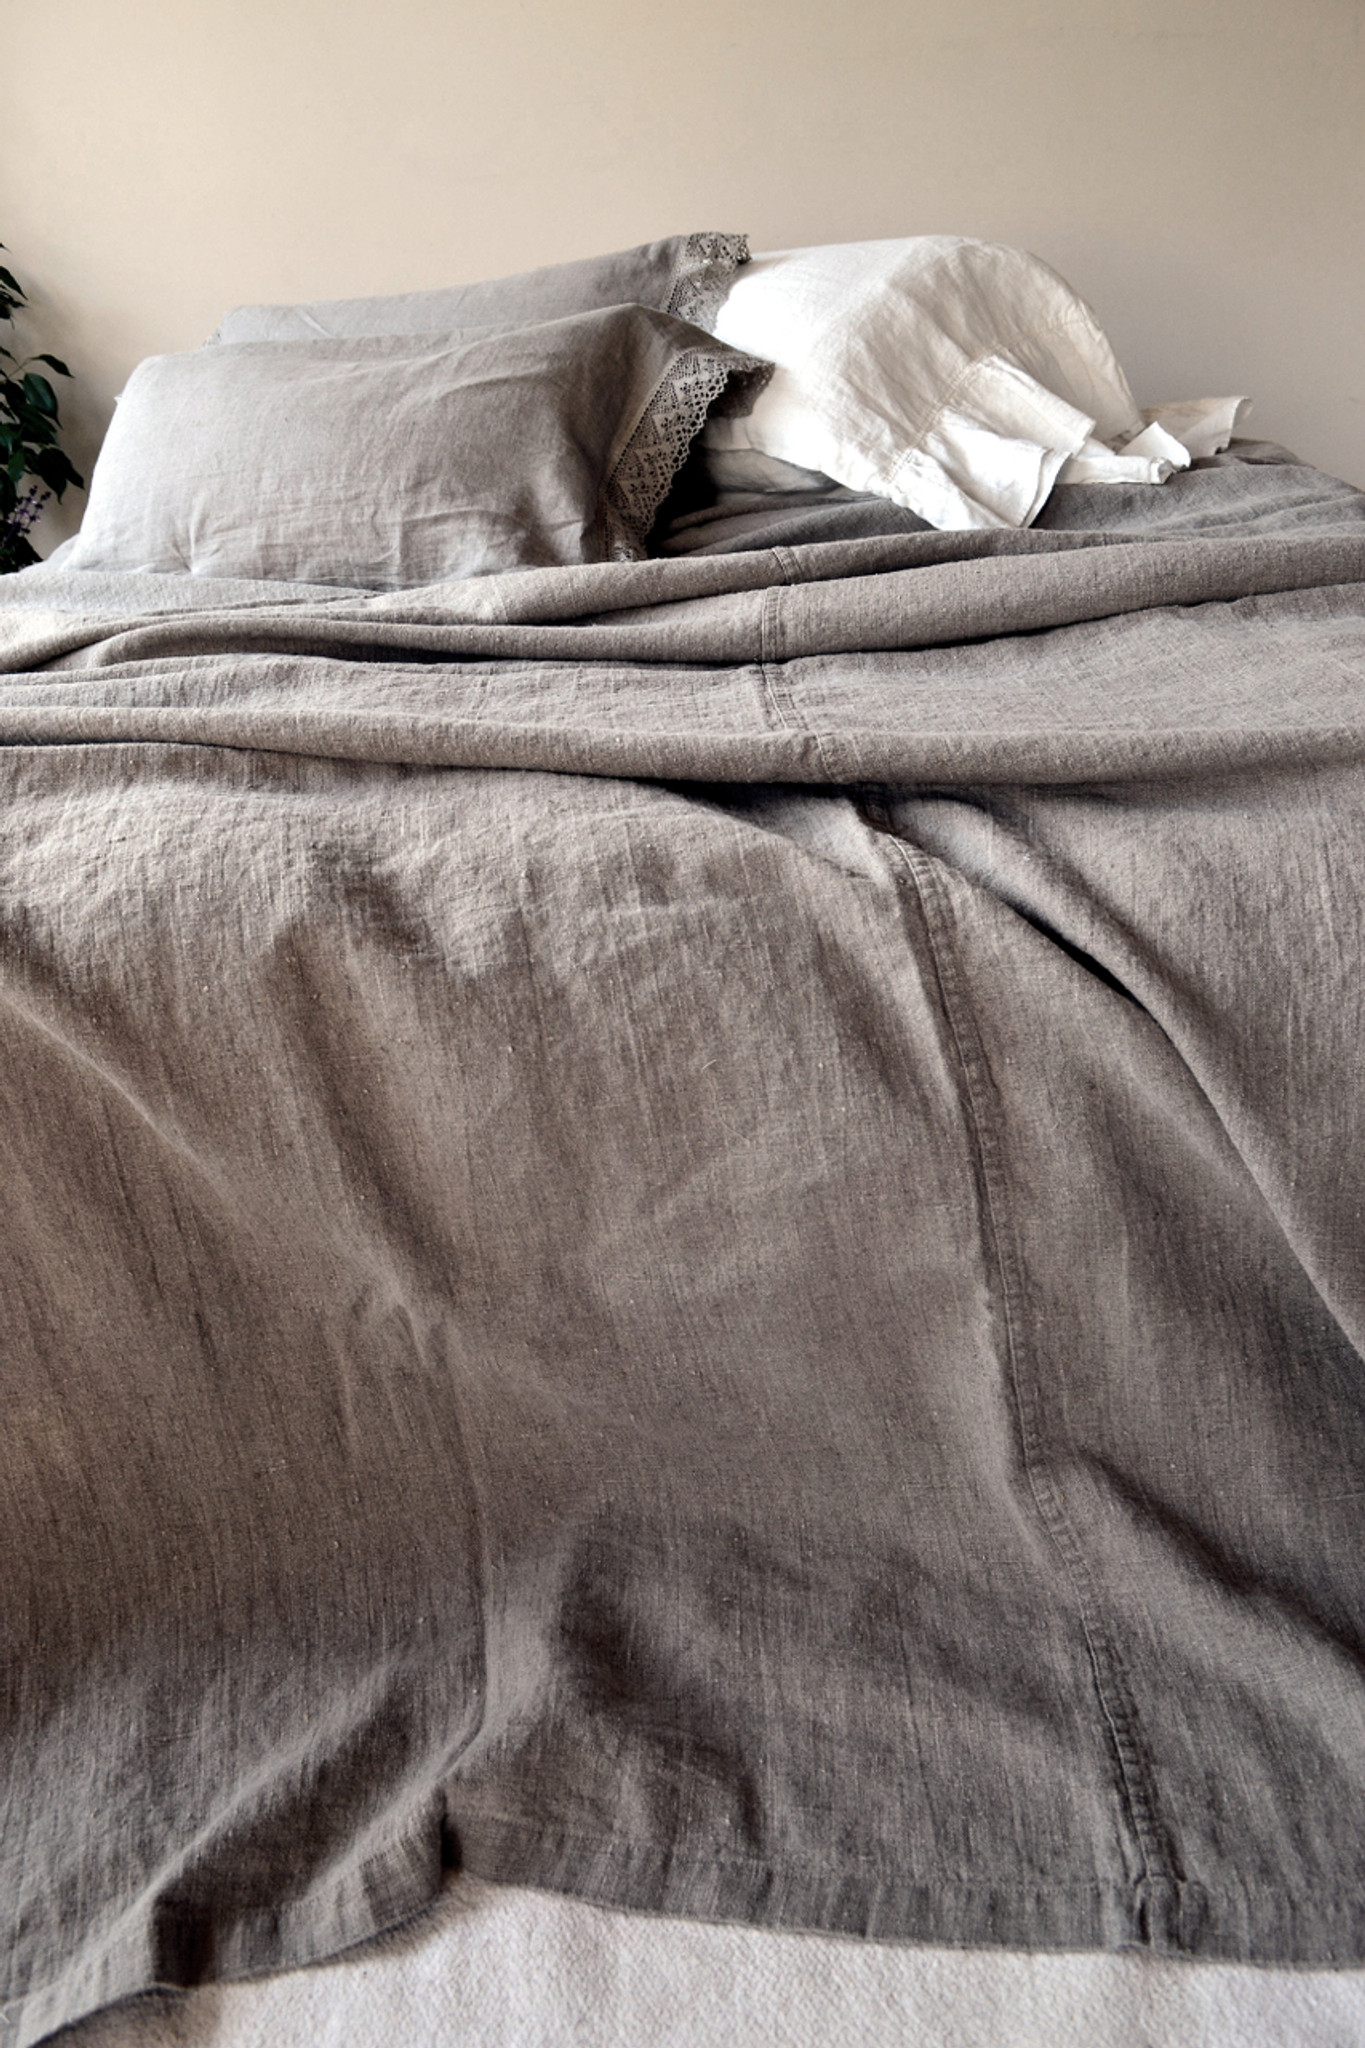 Rustic Rough Linen Bed Cover